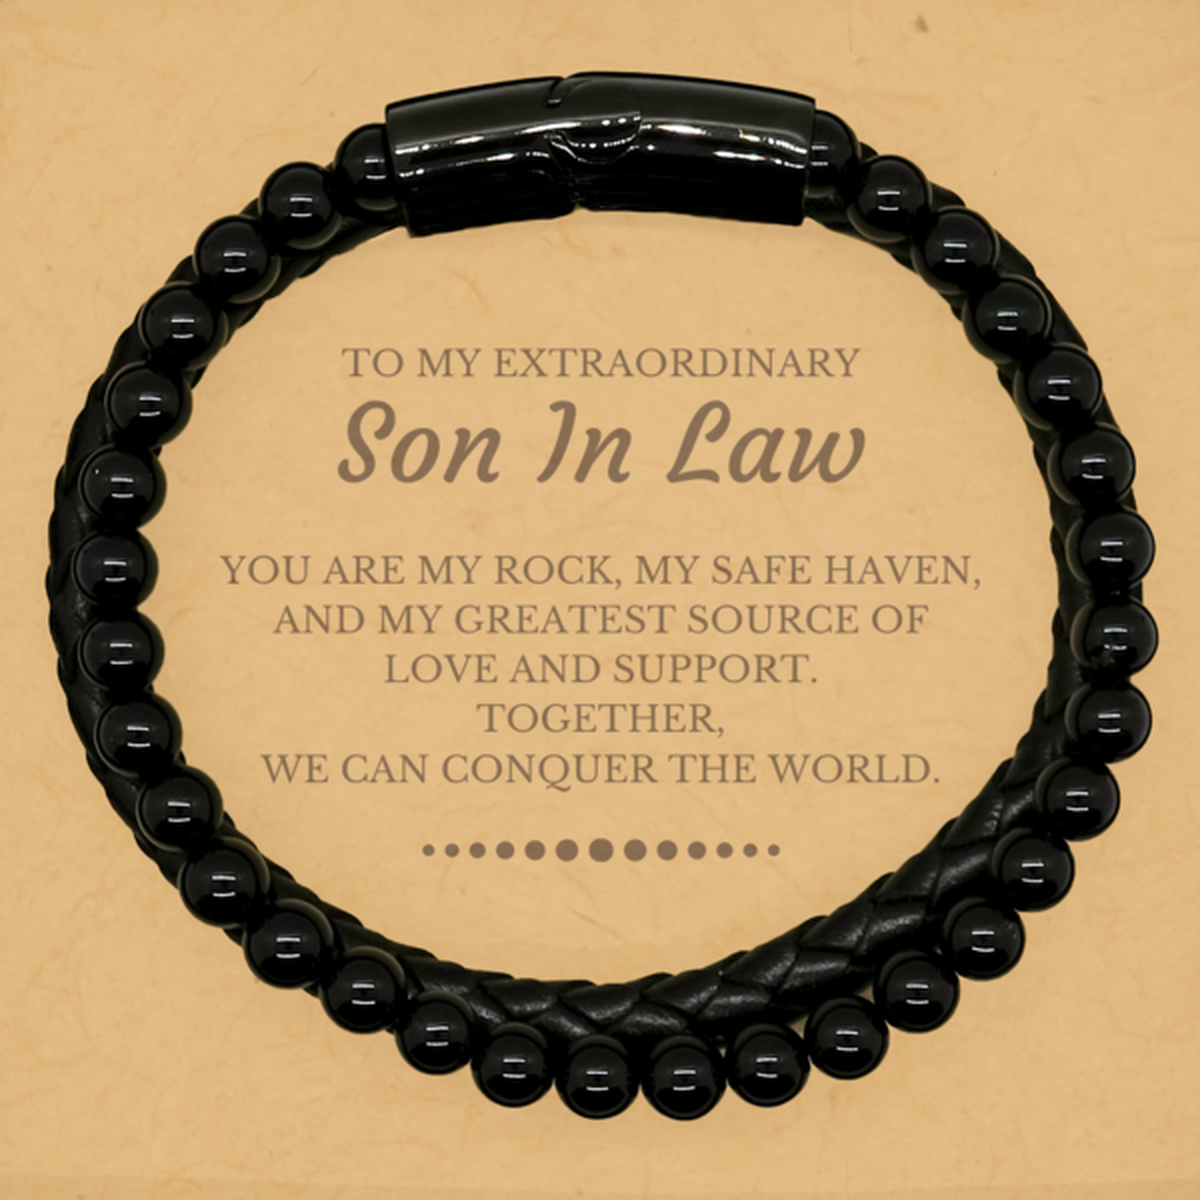 To My Extraordinary Son In Law Gifts, Together, we can conquer the world, Birthday Stone Leather Bracelets For Son In Law, Christmas Gifts For Son In Law